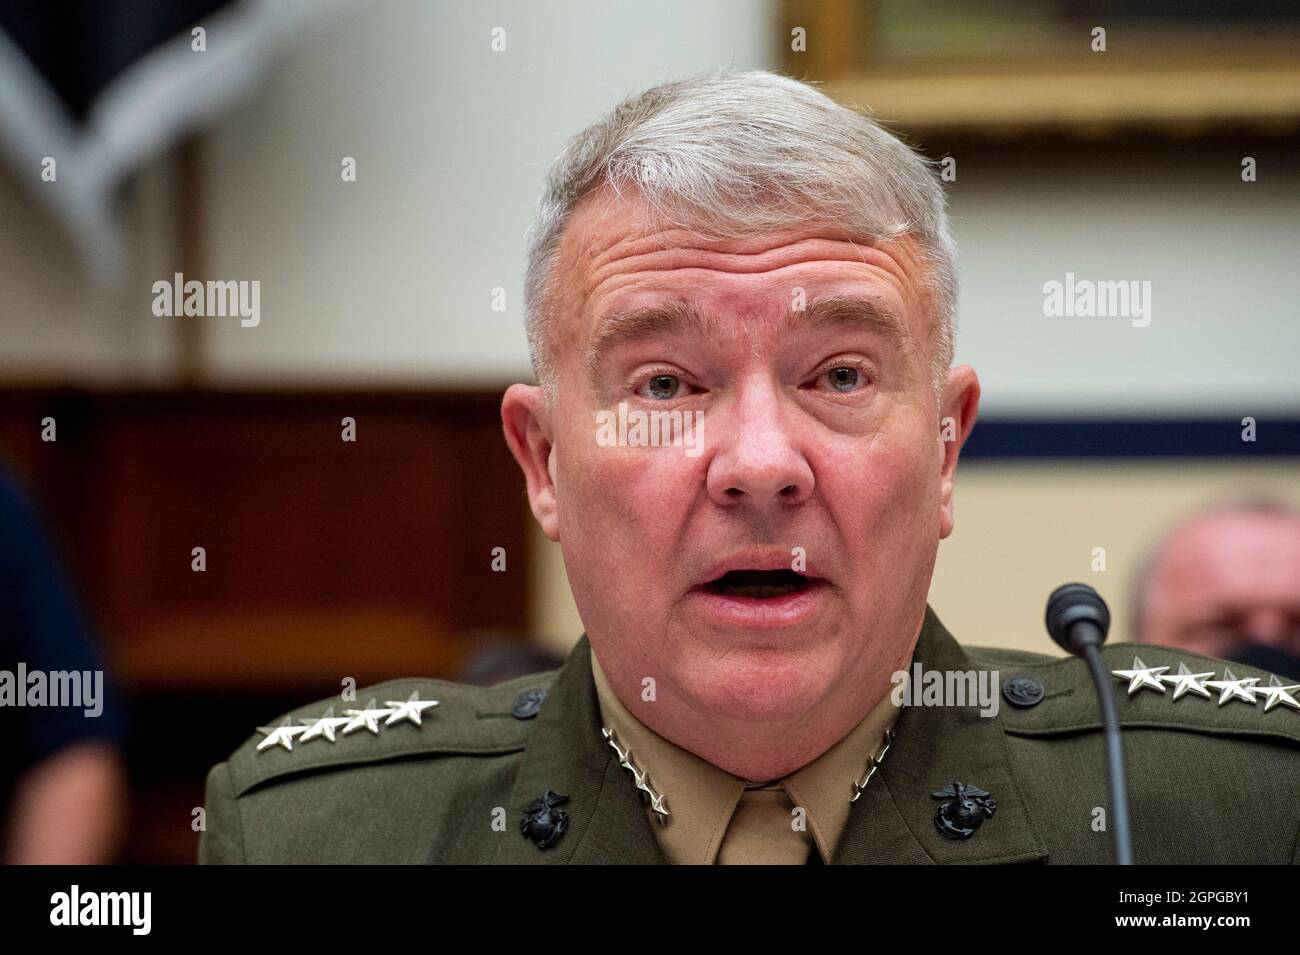 General Kenneth McKenzie Jr., USMC Commander, U.S. Central Command responds to questions during a House Armed Services Committee hearing on âEnding the U.S. Military Mission in Afghanistanâ in the Rayburn House Office Building in Washington, DC, Wednesday, September 29, 2021. Credit: Rod Lamkey / Pool via CNP Stock Photo